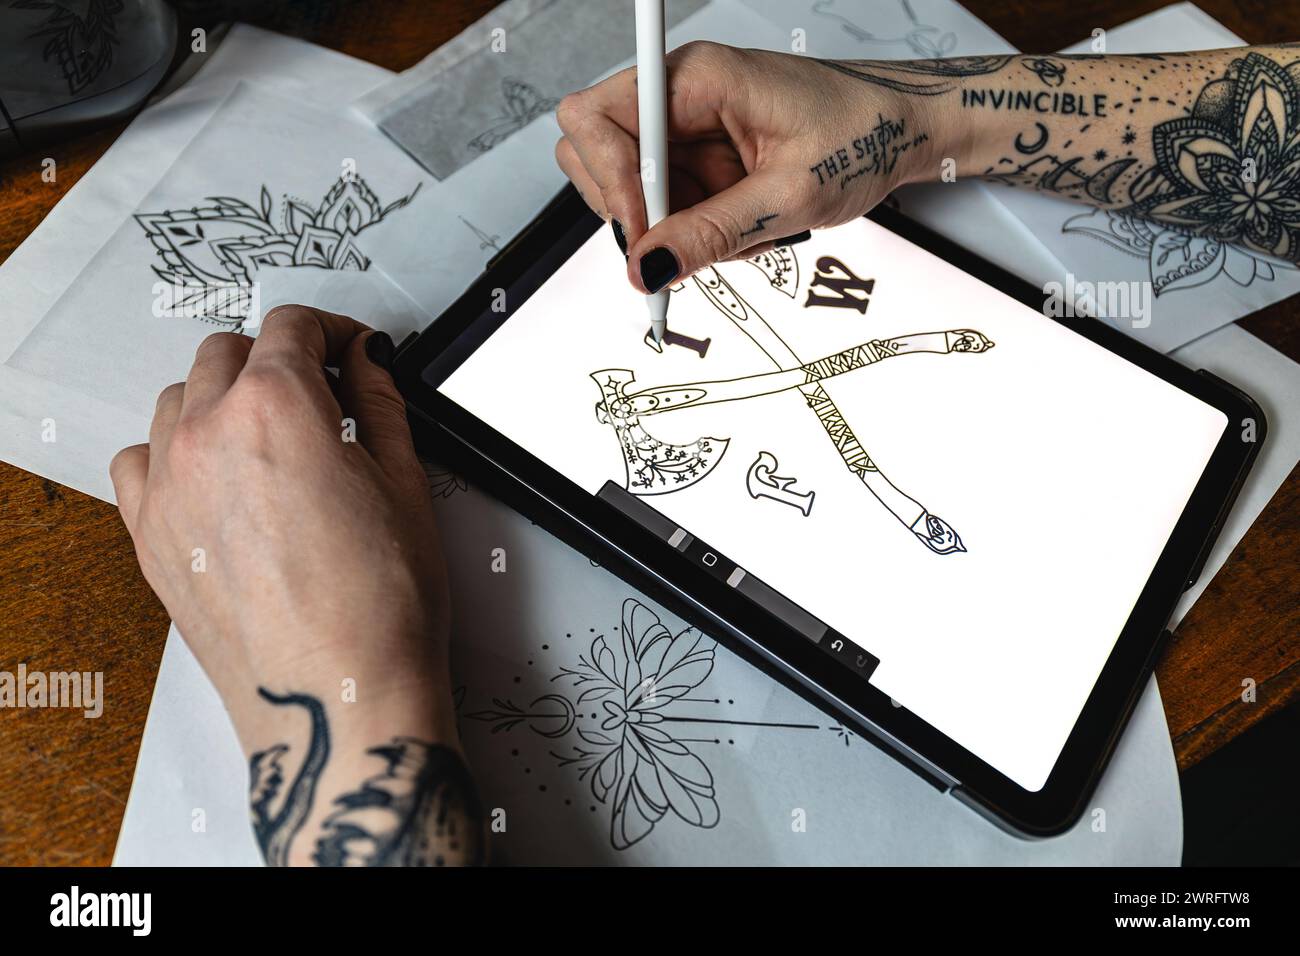 Horizontal photo an artist's hand carefully renders a tattoo design on a graphic tablet amid a spread of paper sketches. Concept business, art. Stock Photo